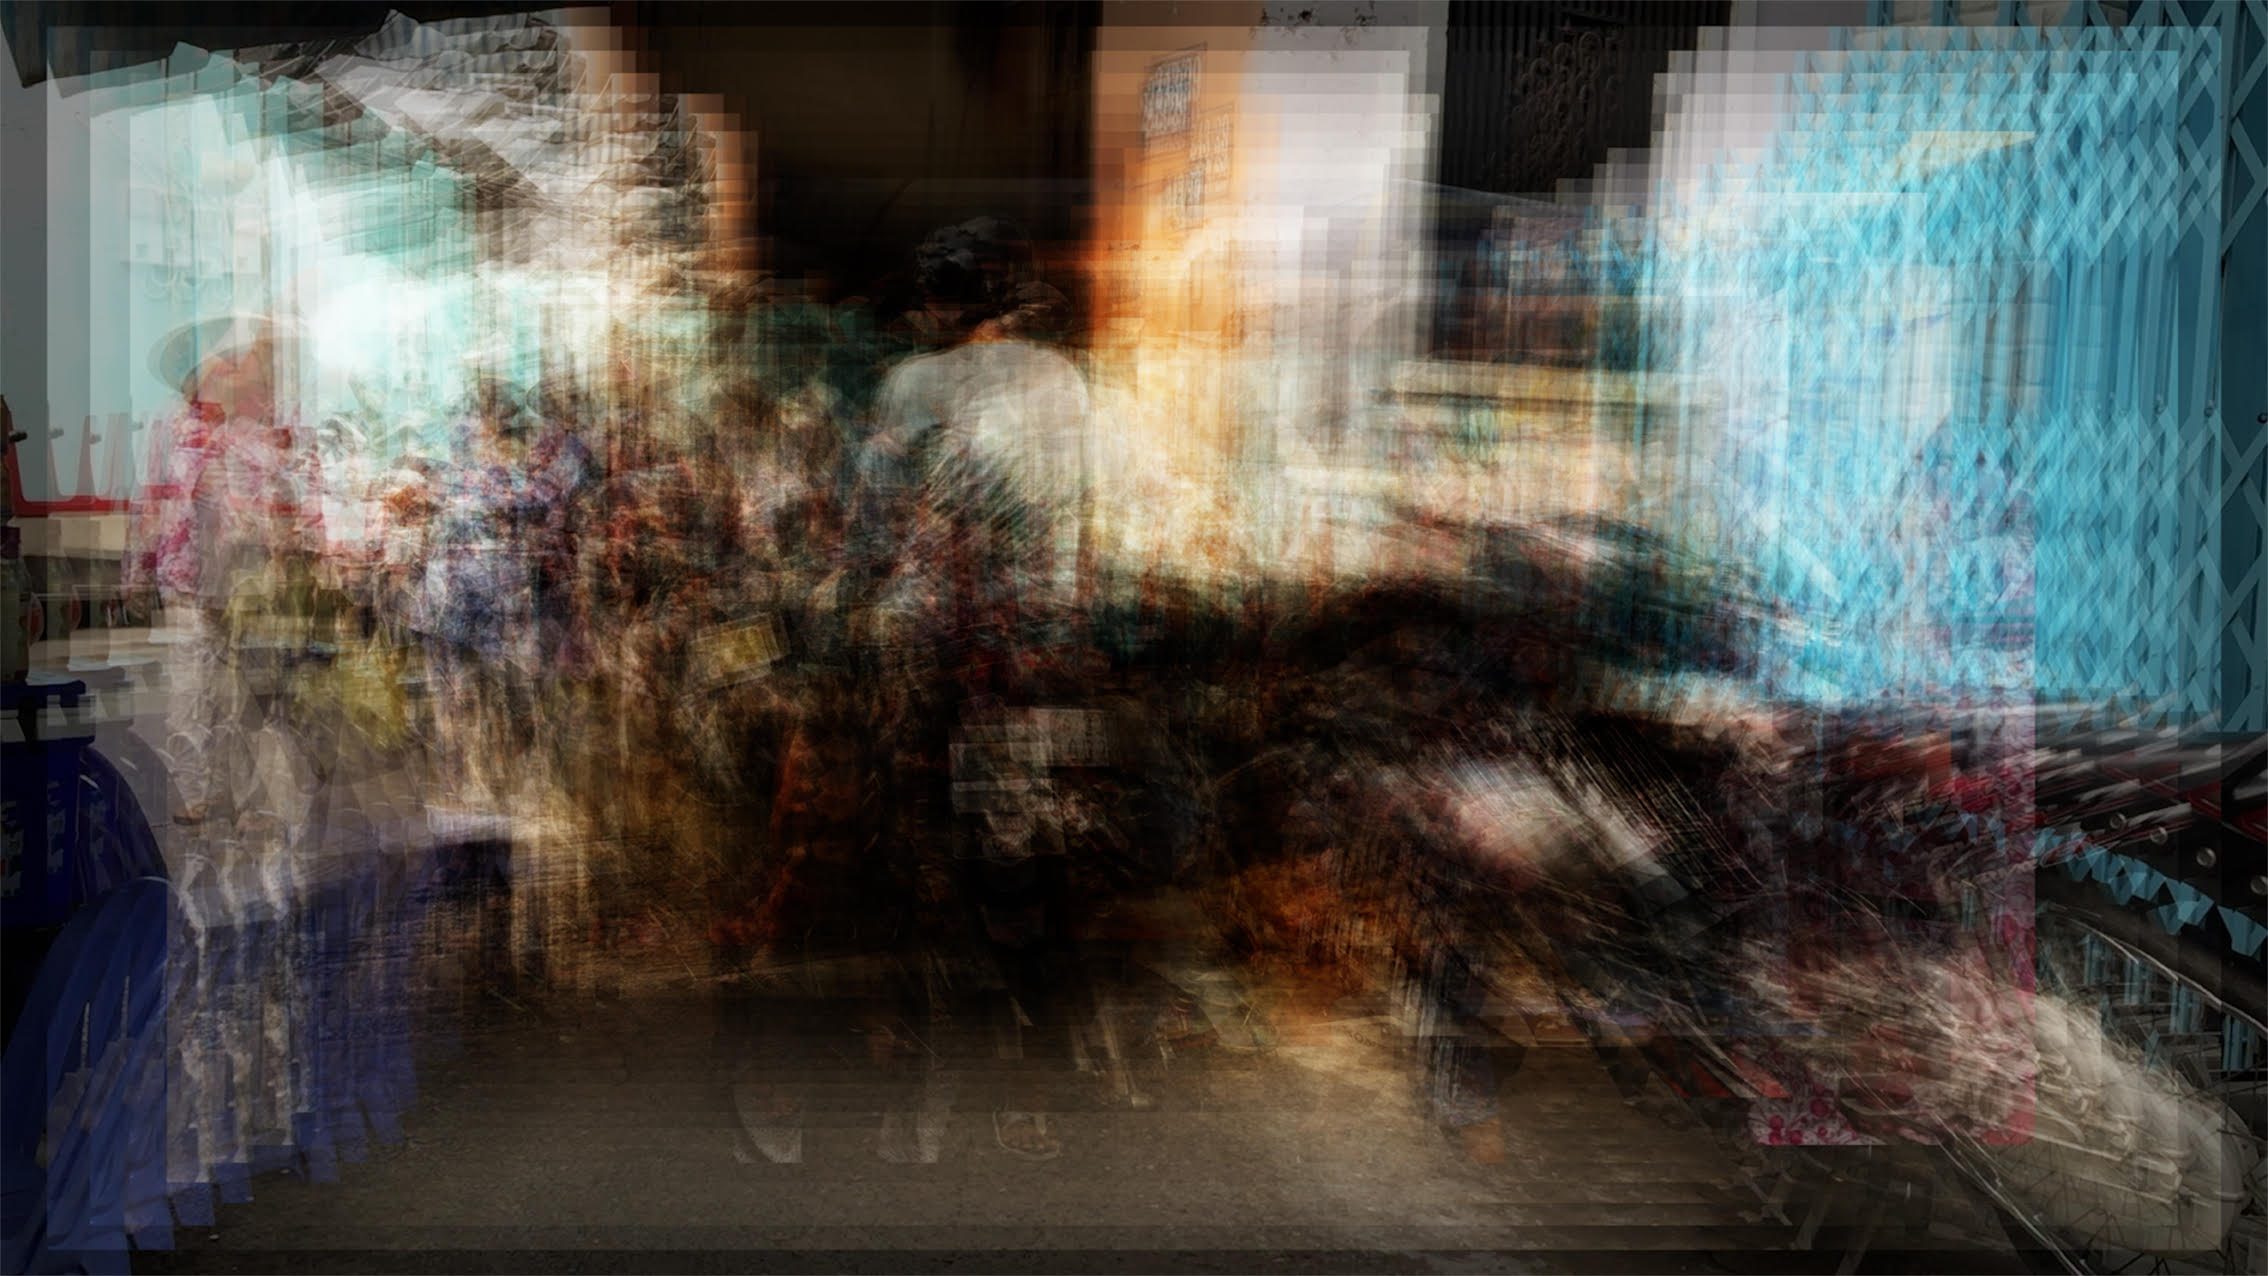 A composite image that shows the intense and dynamic experience of the hem spaces through the movement of people and motorbikes. This image is made up of layering film frames on top of each other, showing a sequence of film in one picture.